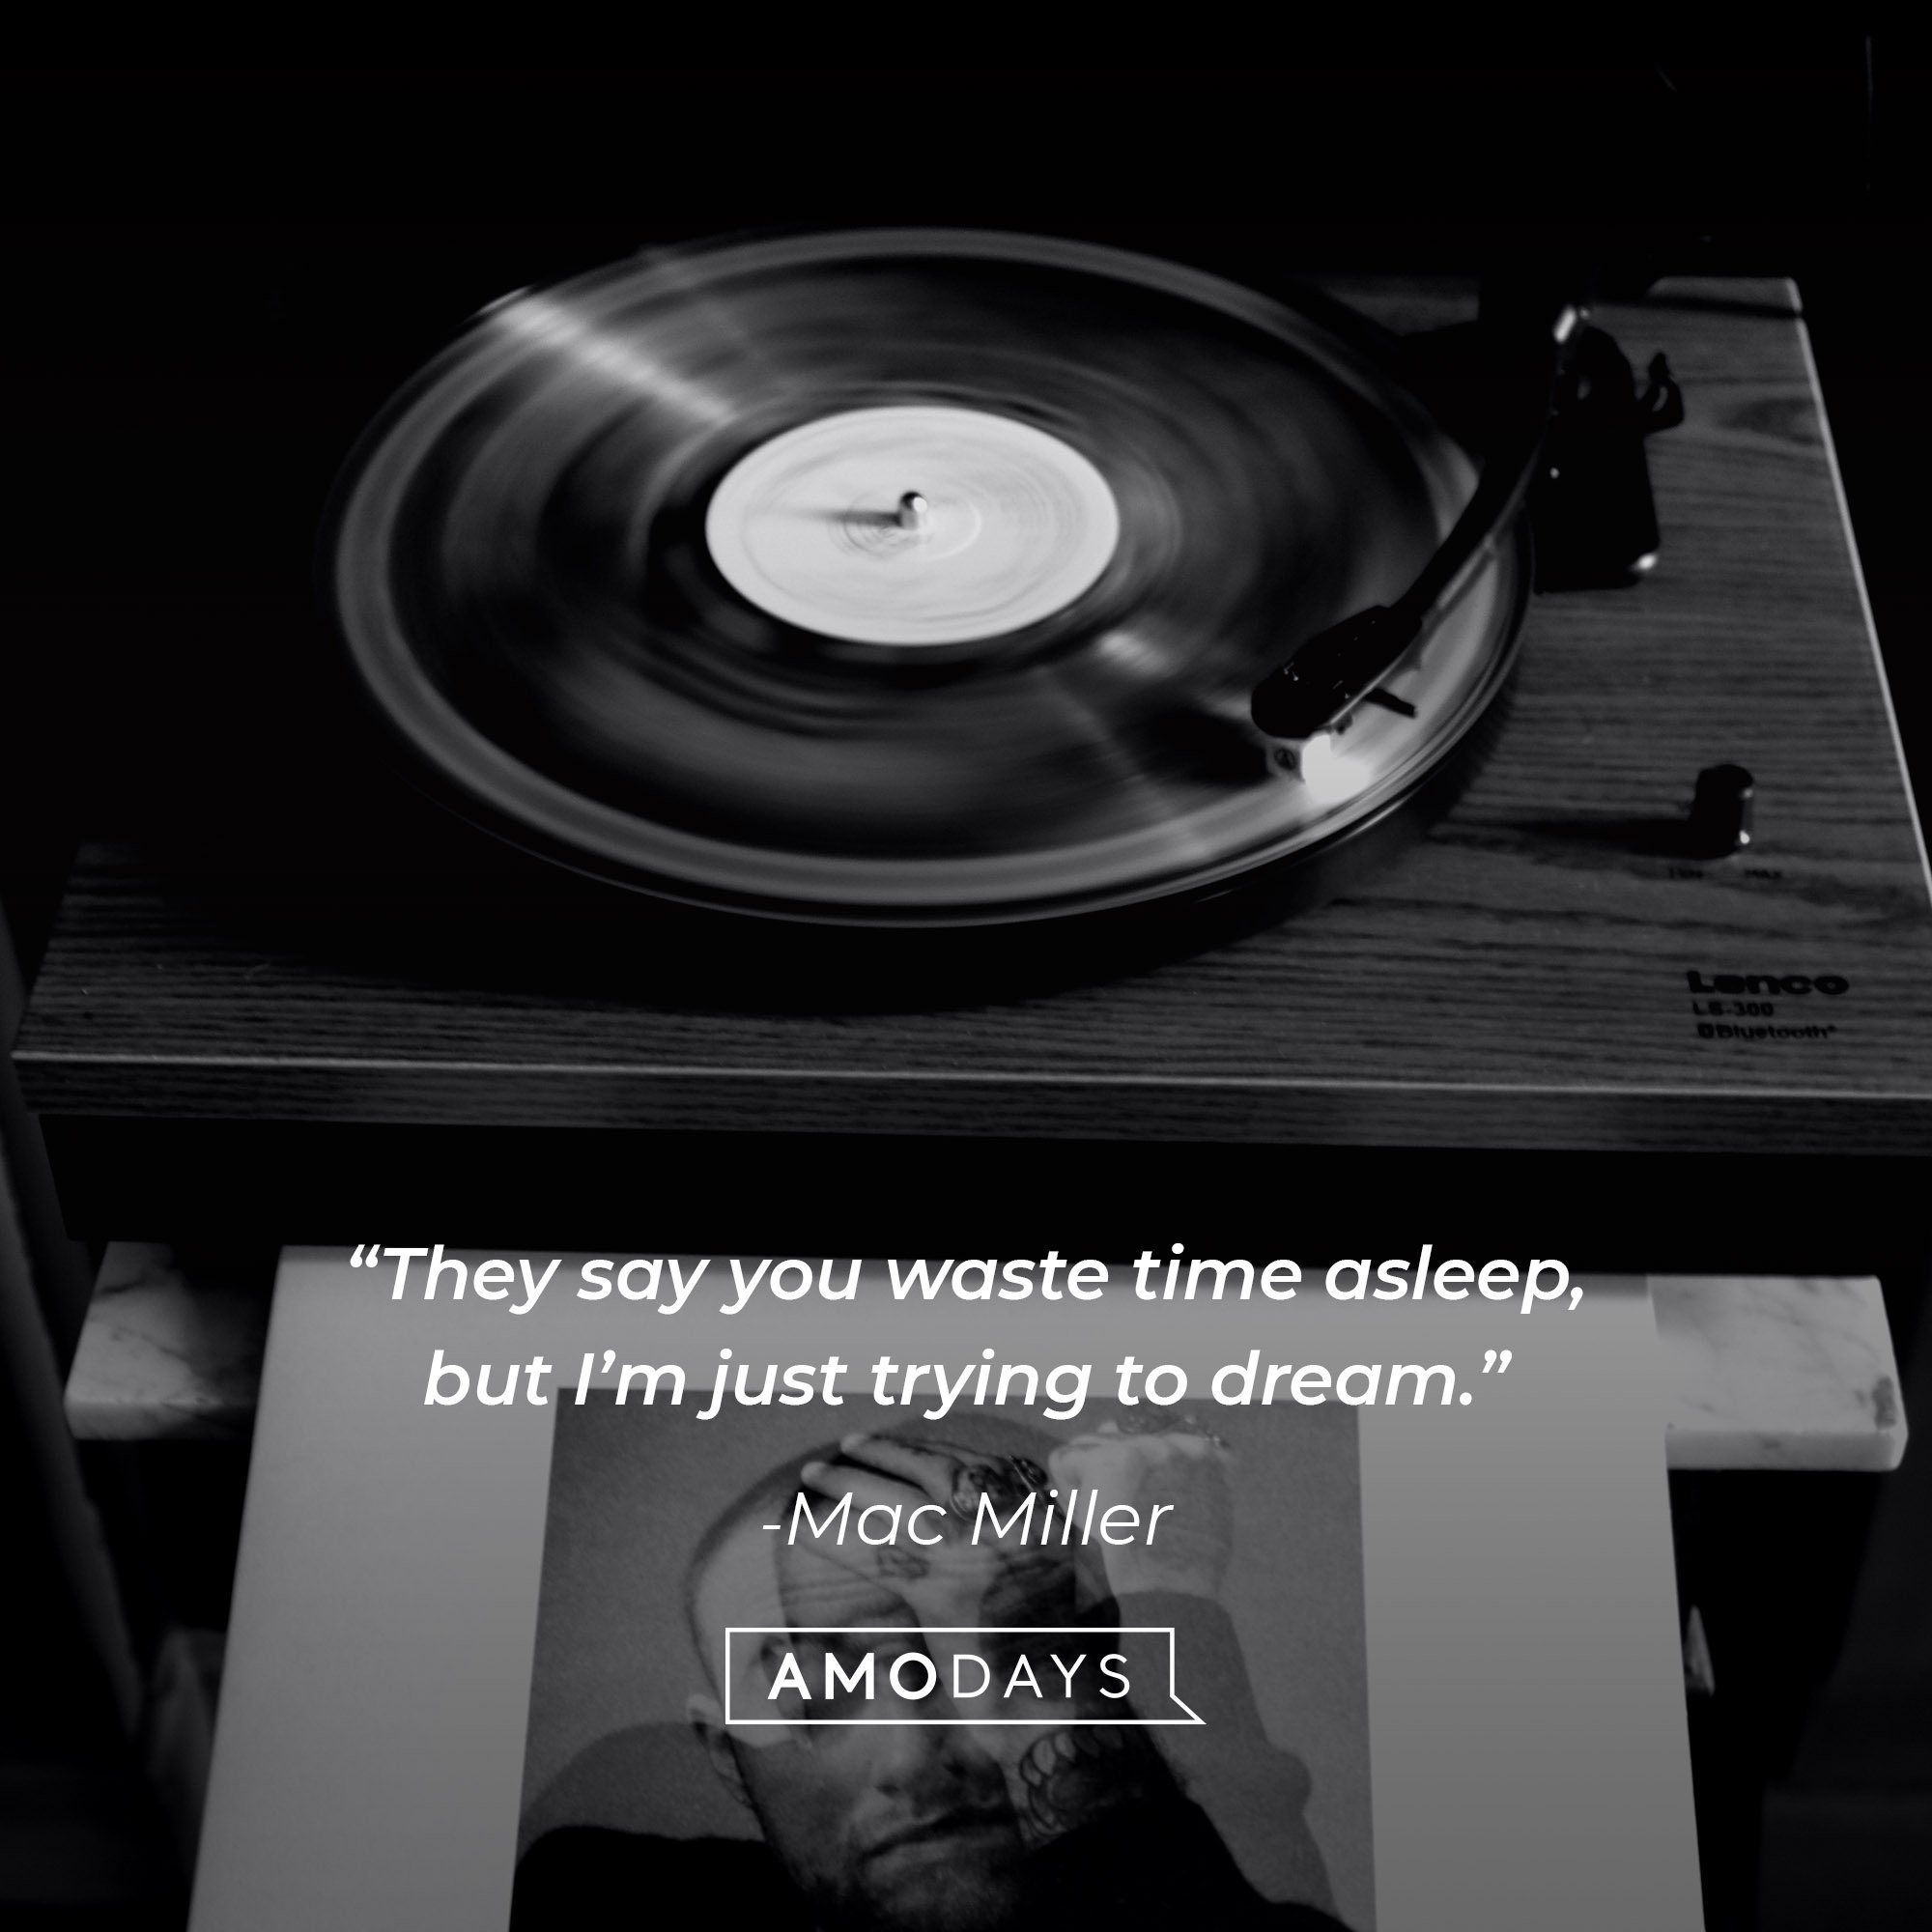  Mac Miller‘s quote: “They say you waste time asleep, but I’m just trying to dream.” │Image: AmoDays